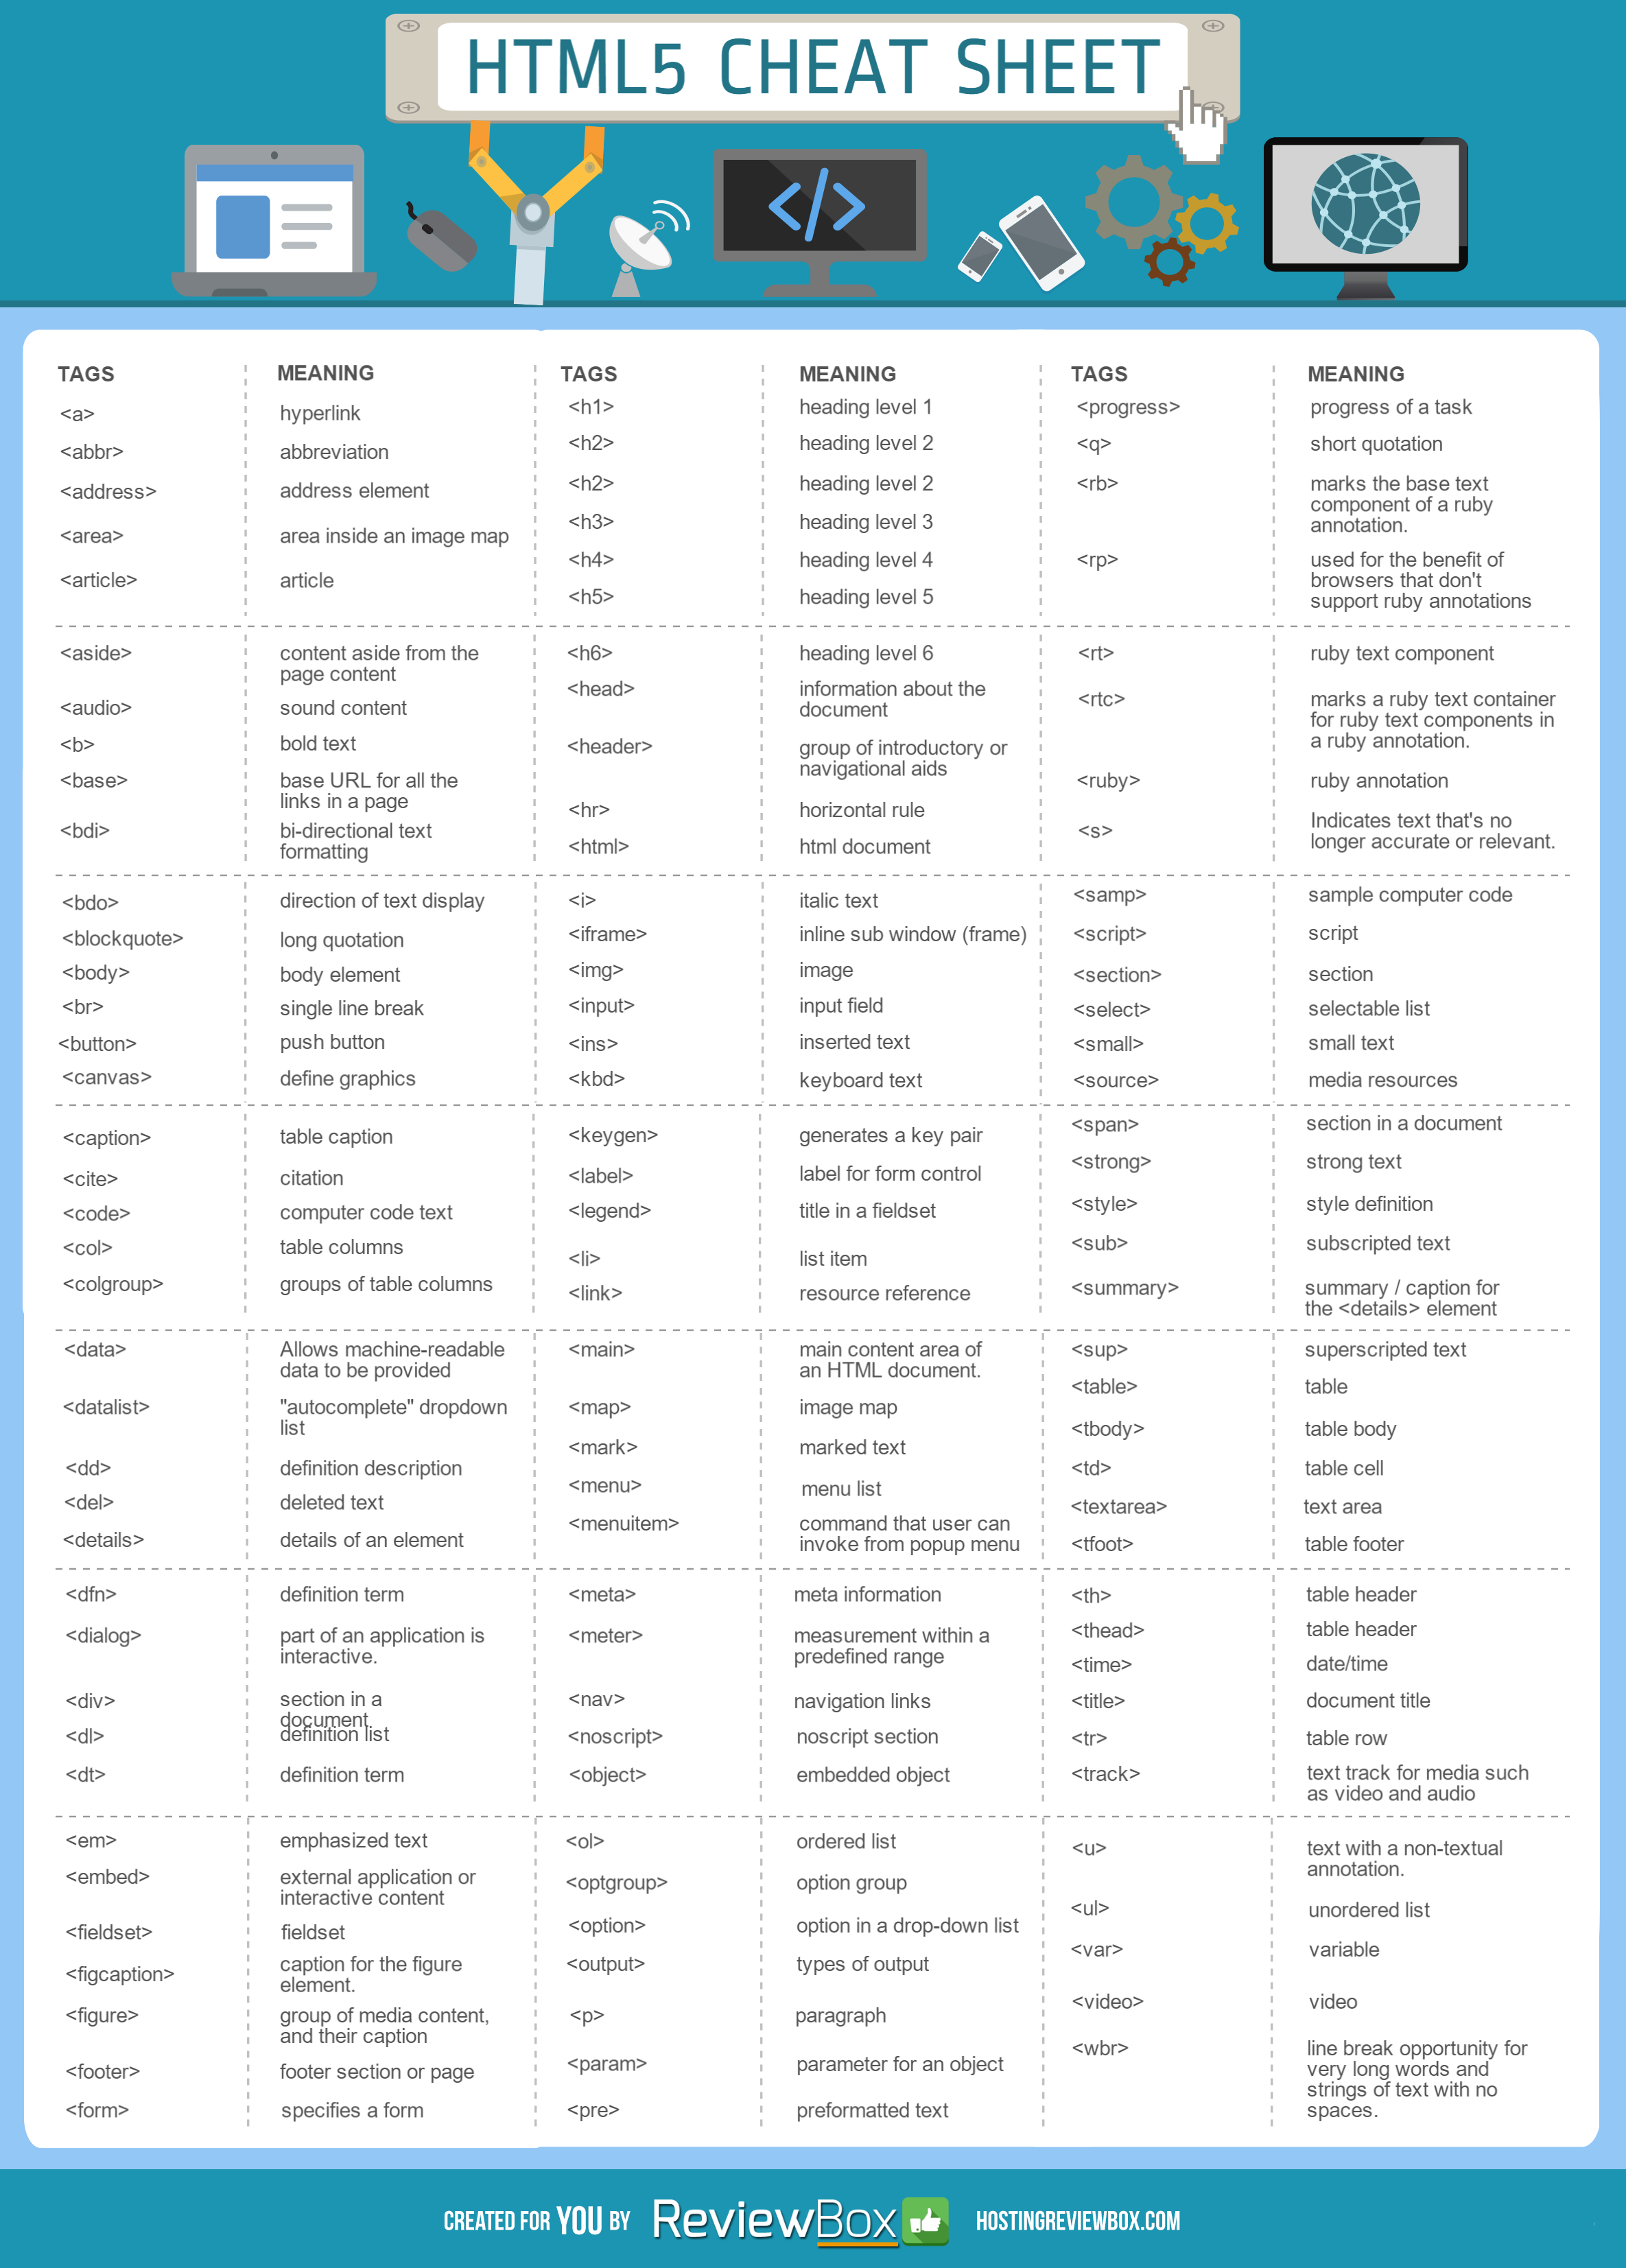 Cheat Sheet : All Cheat Sheets in one page